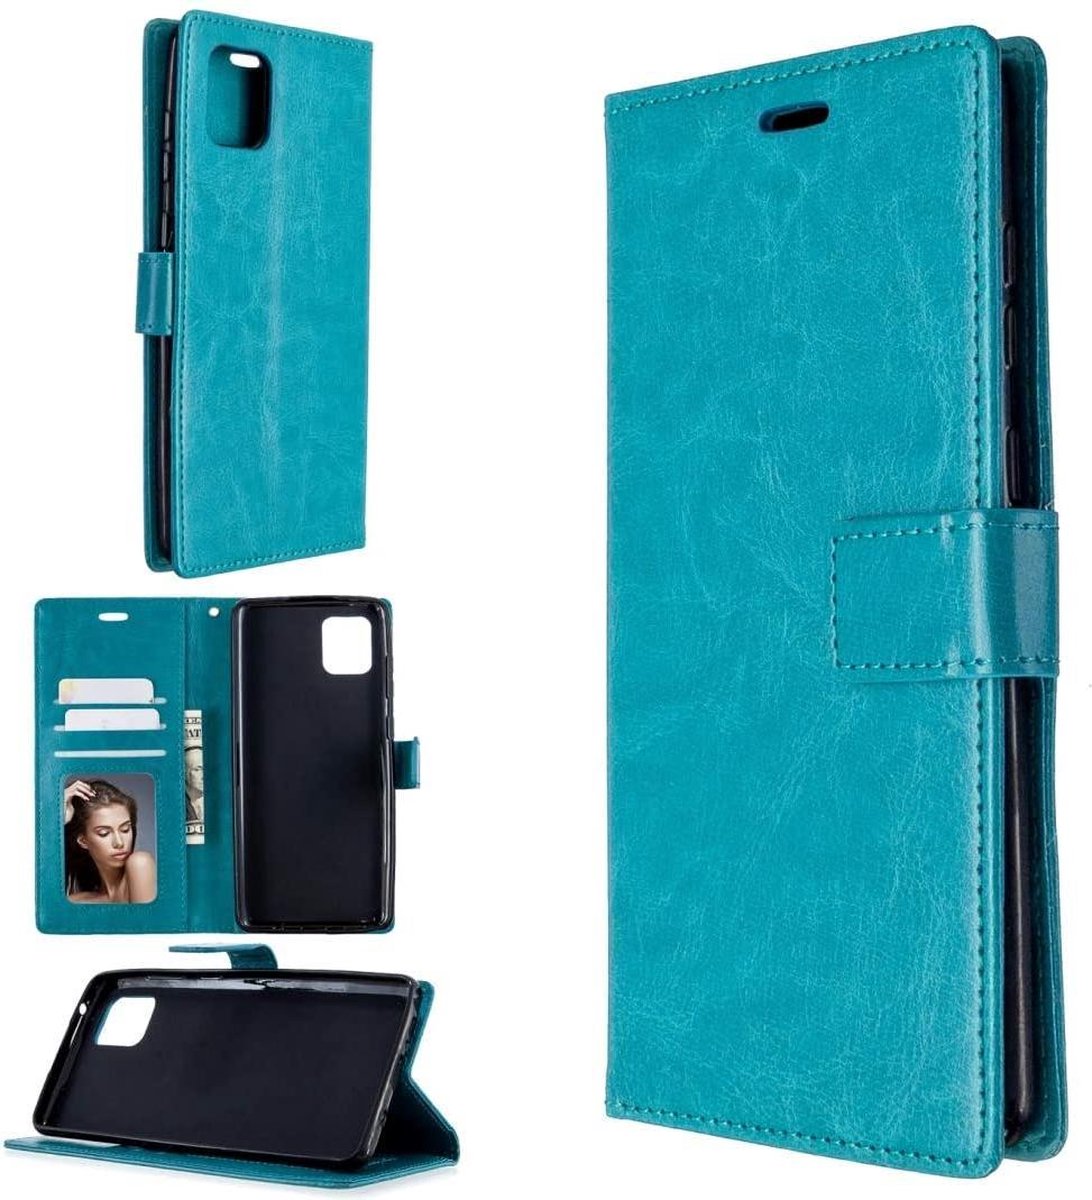 Samsung Galaxy A81 hoesje book case turquoise